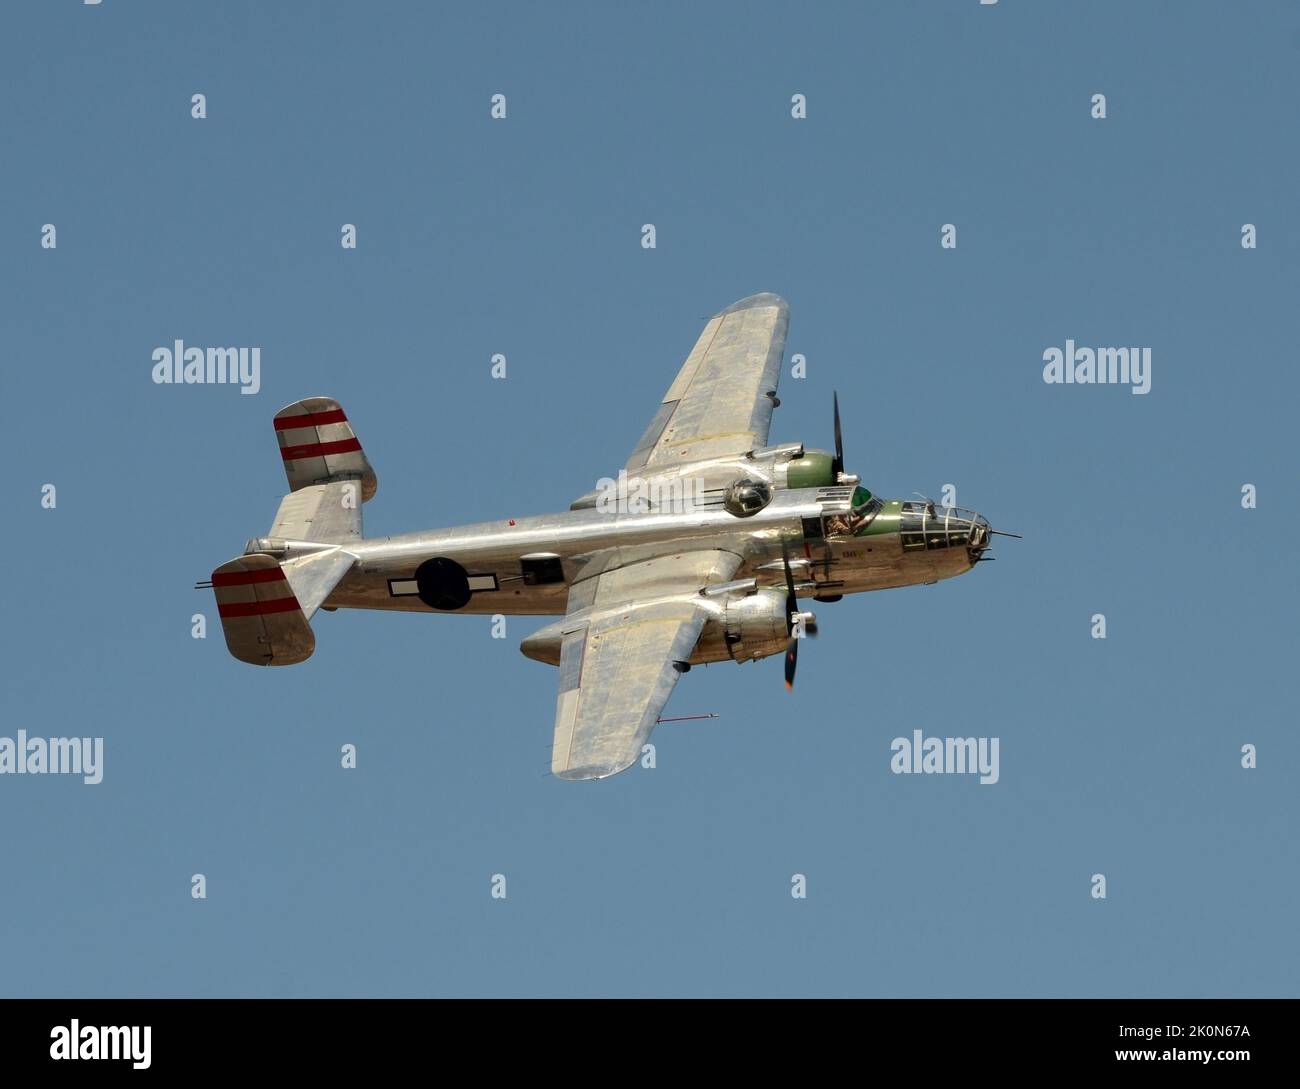 Light American bomber from World War II photographed in flight Stock Photo